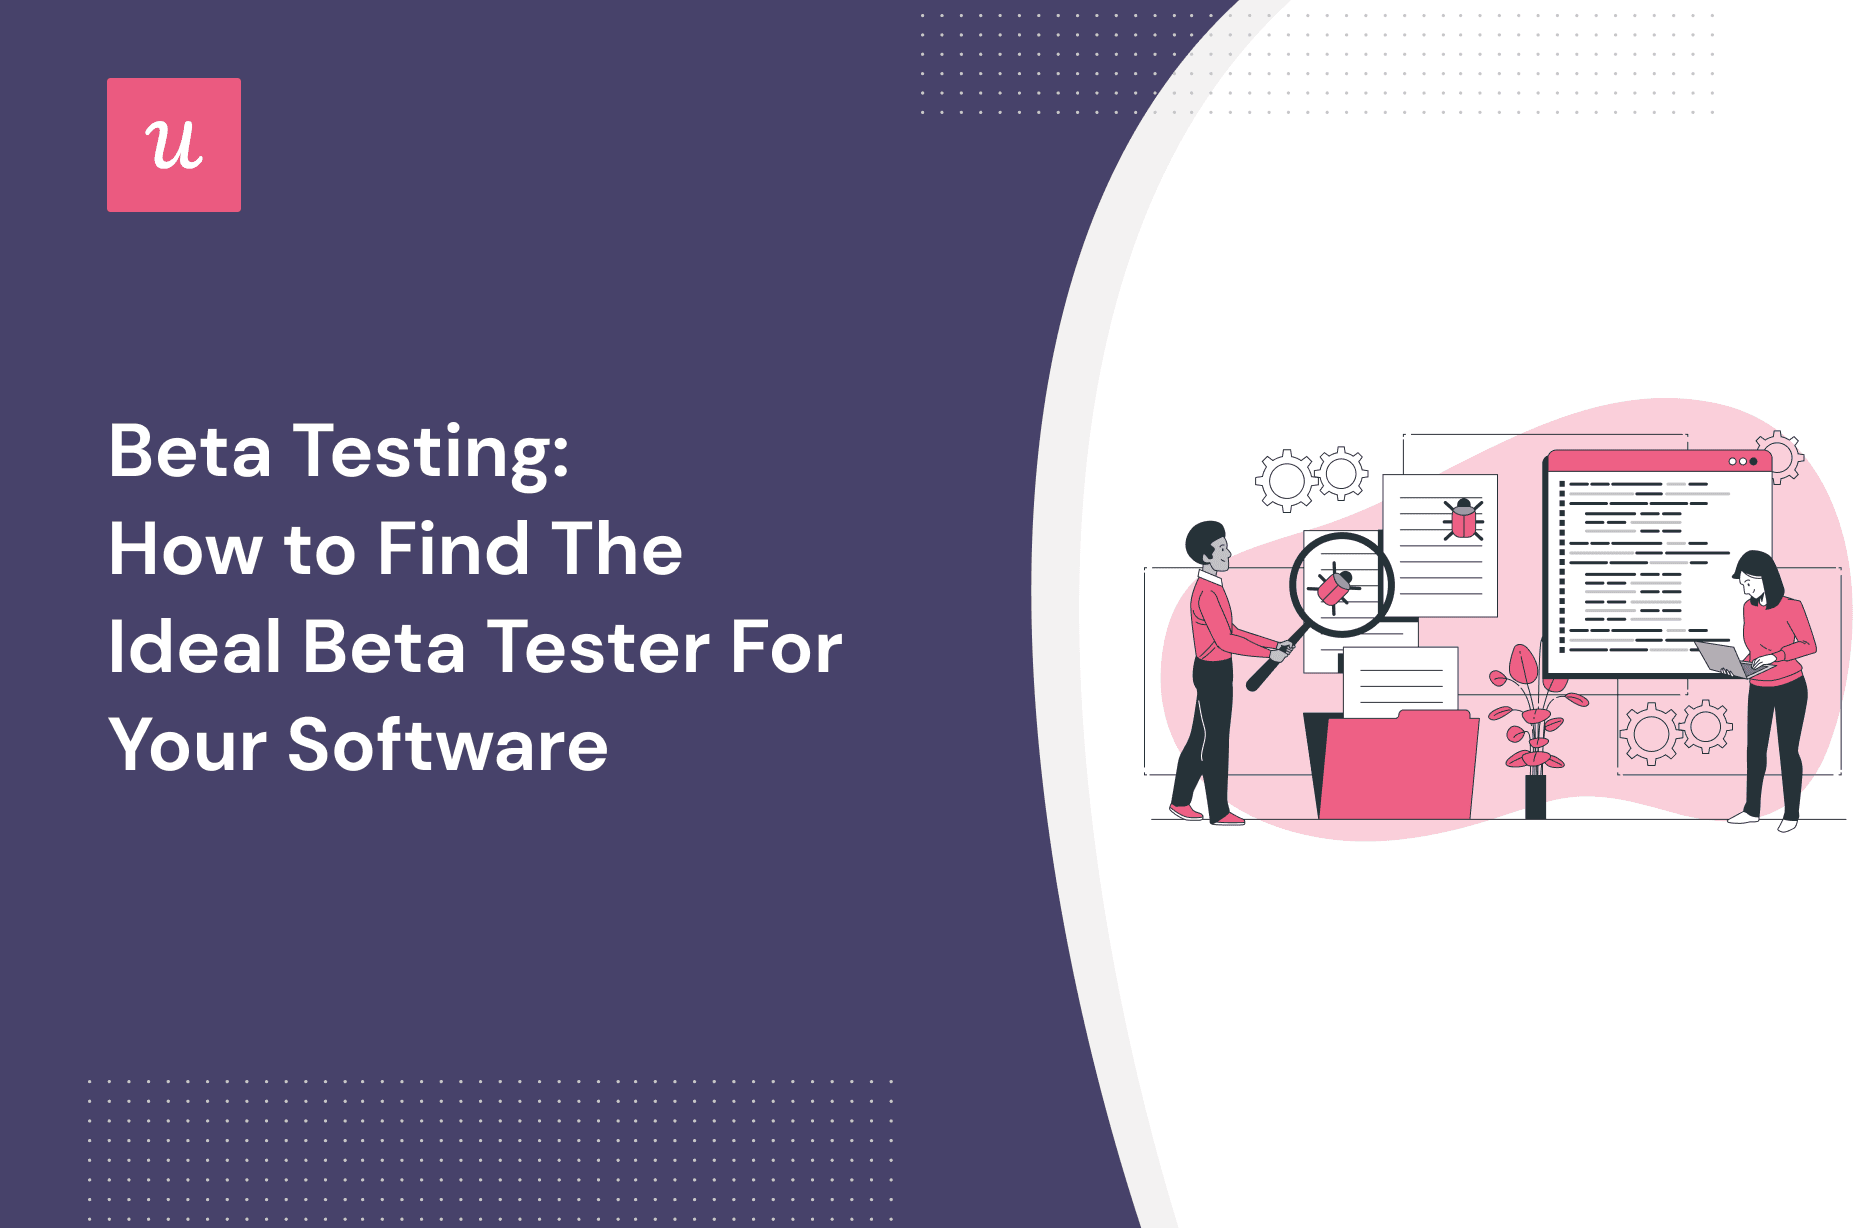 Beta Testing: How to Find The Ideal Beta Tester For Your Software cover